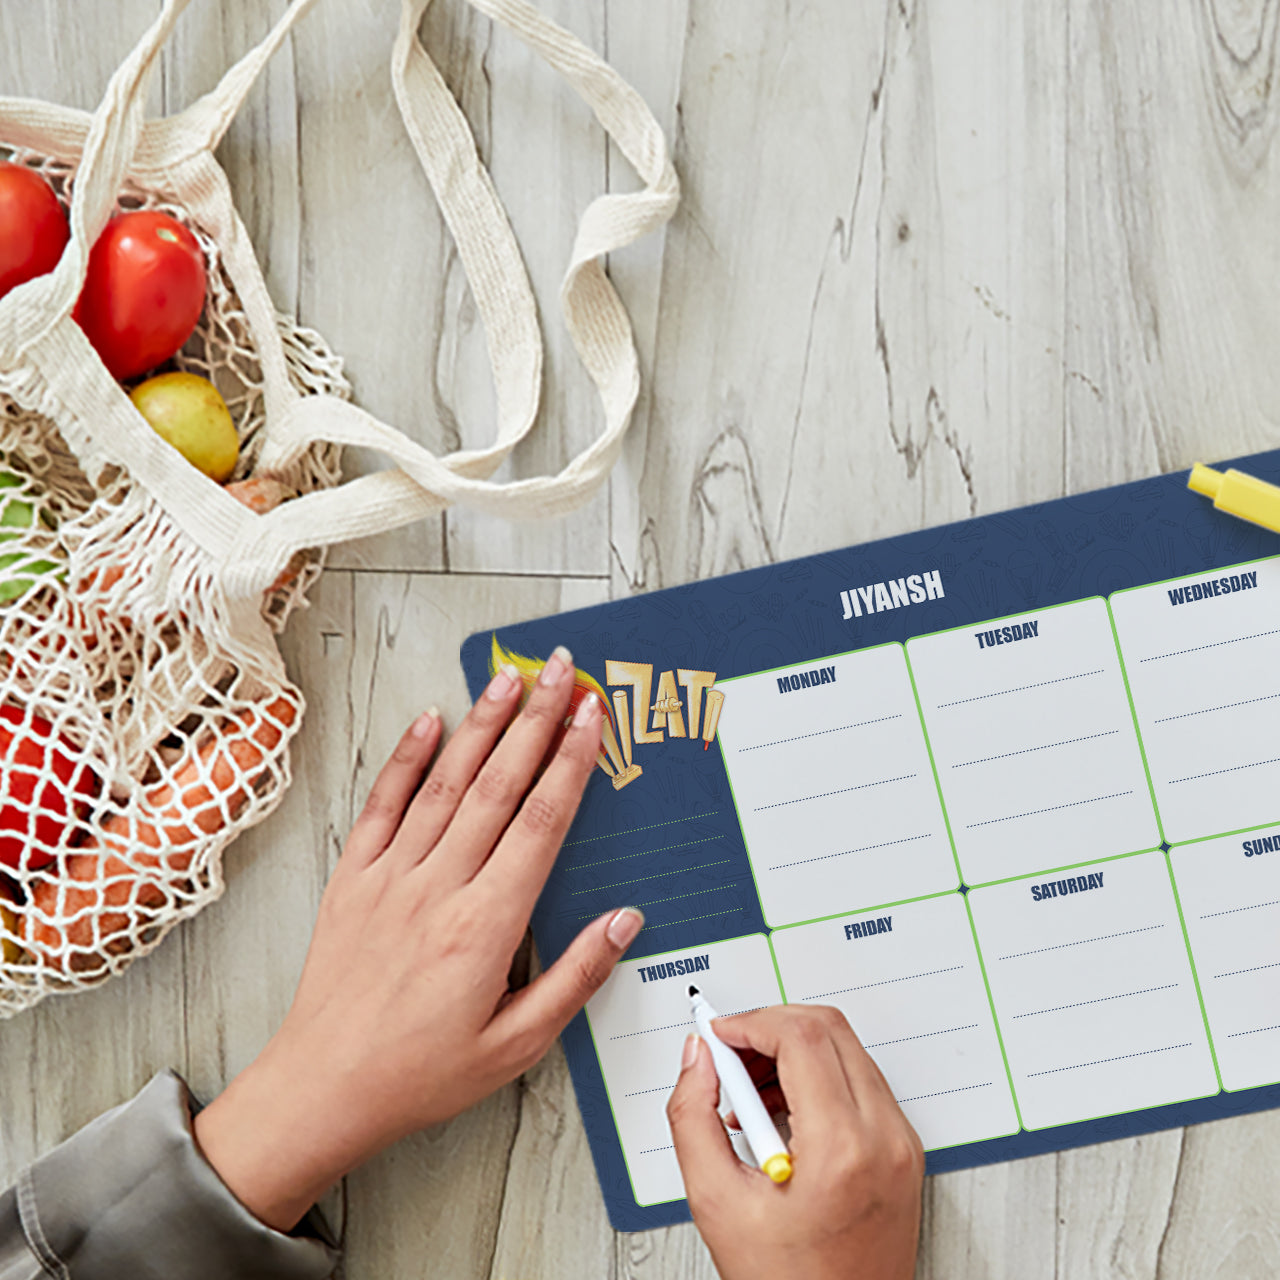 Personalised Meal / Weekly Planner - Cricket Buzz